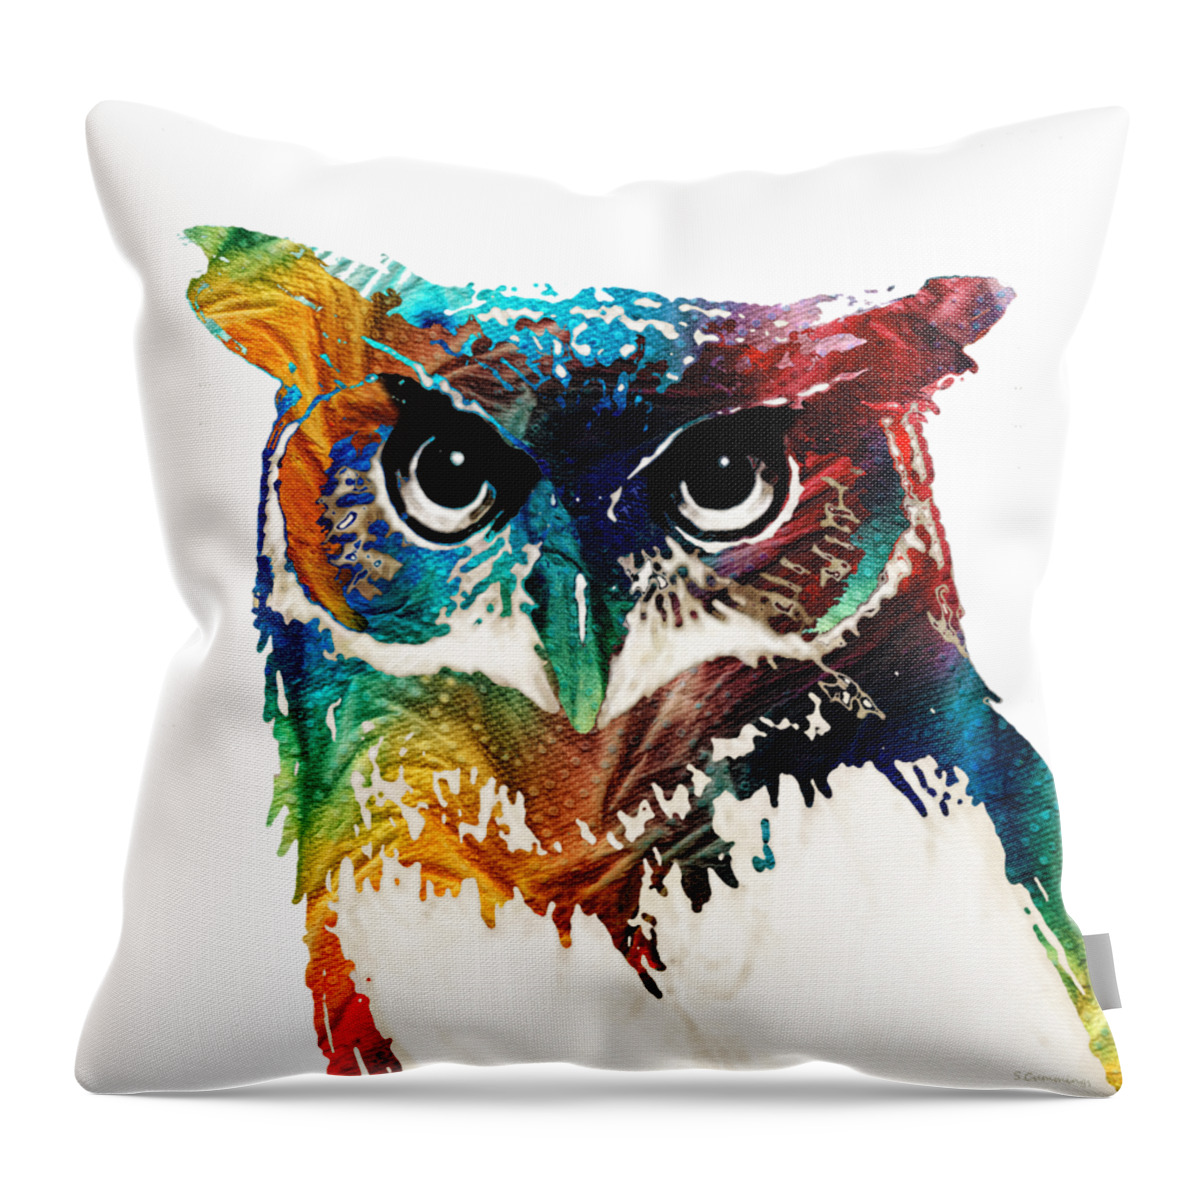 Owl Throw Pillow featuring the painting Colorful Owl Art - Wise Guy - By Sharon Cummings by Sharon Cummings